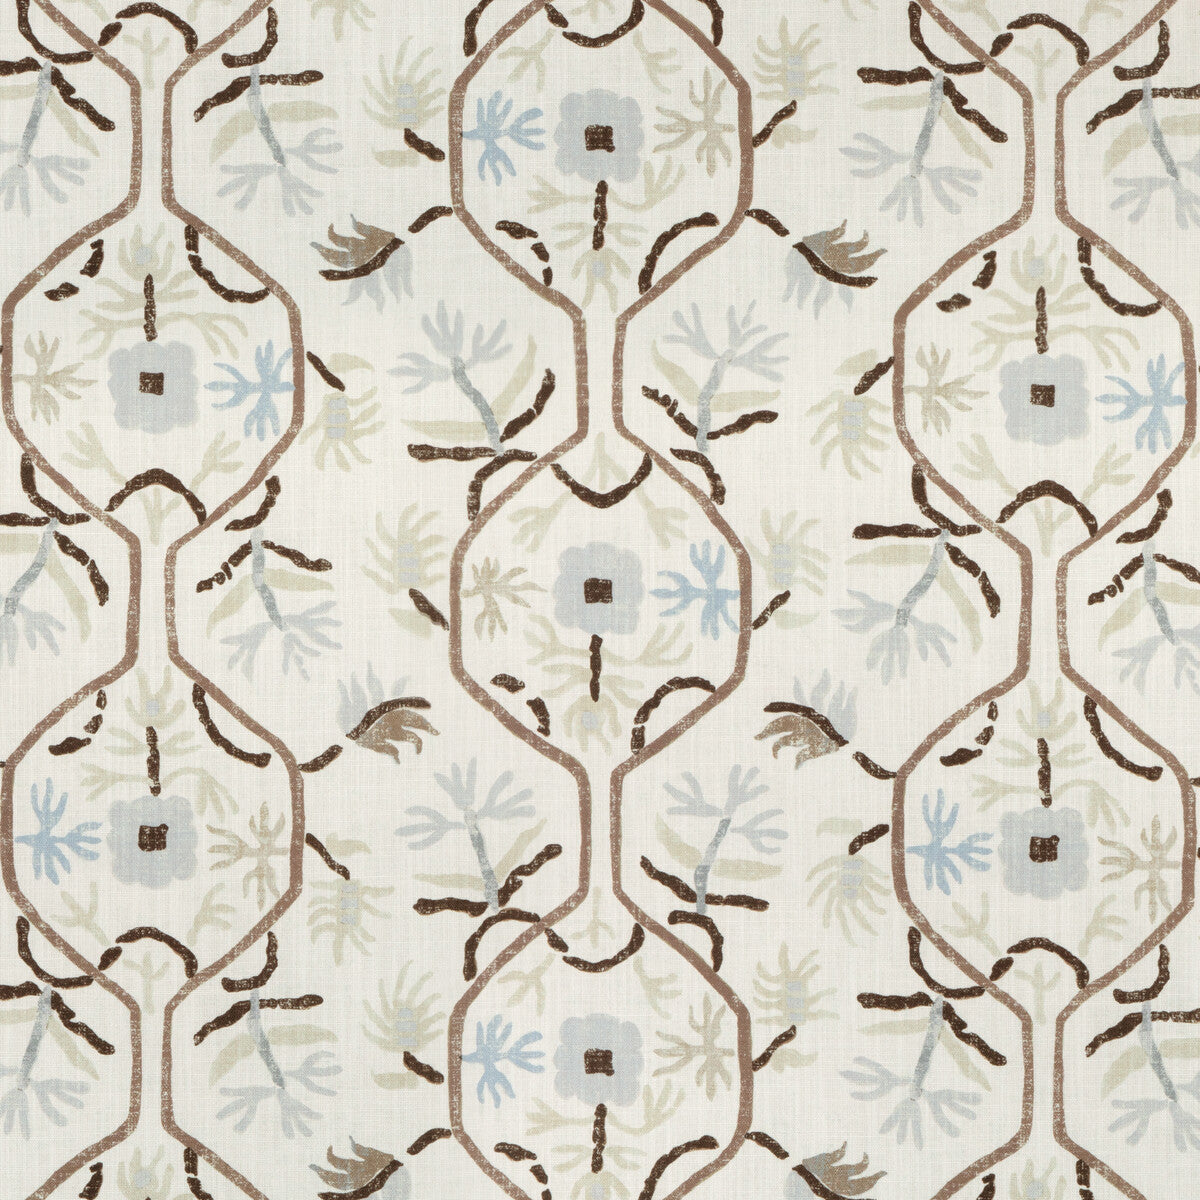 Le Jasmin Print fabric in pumice color - pattern 8024110.1611.0 - by Brunschwig &amp; Fils in the Les Ensembliers L&